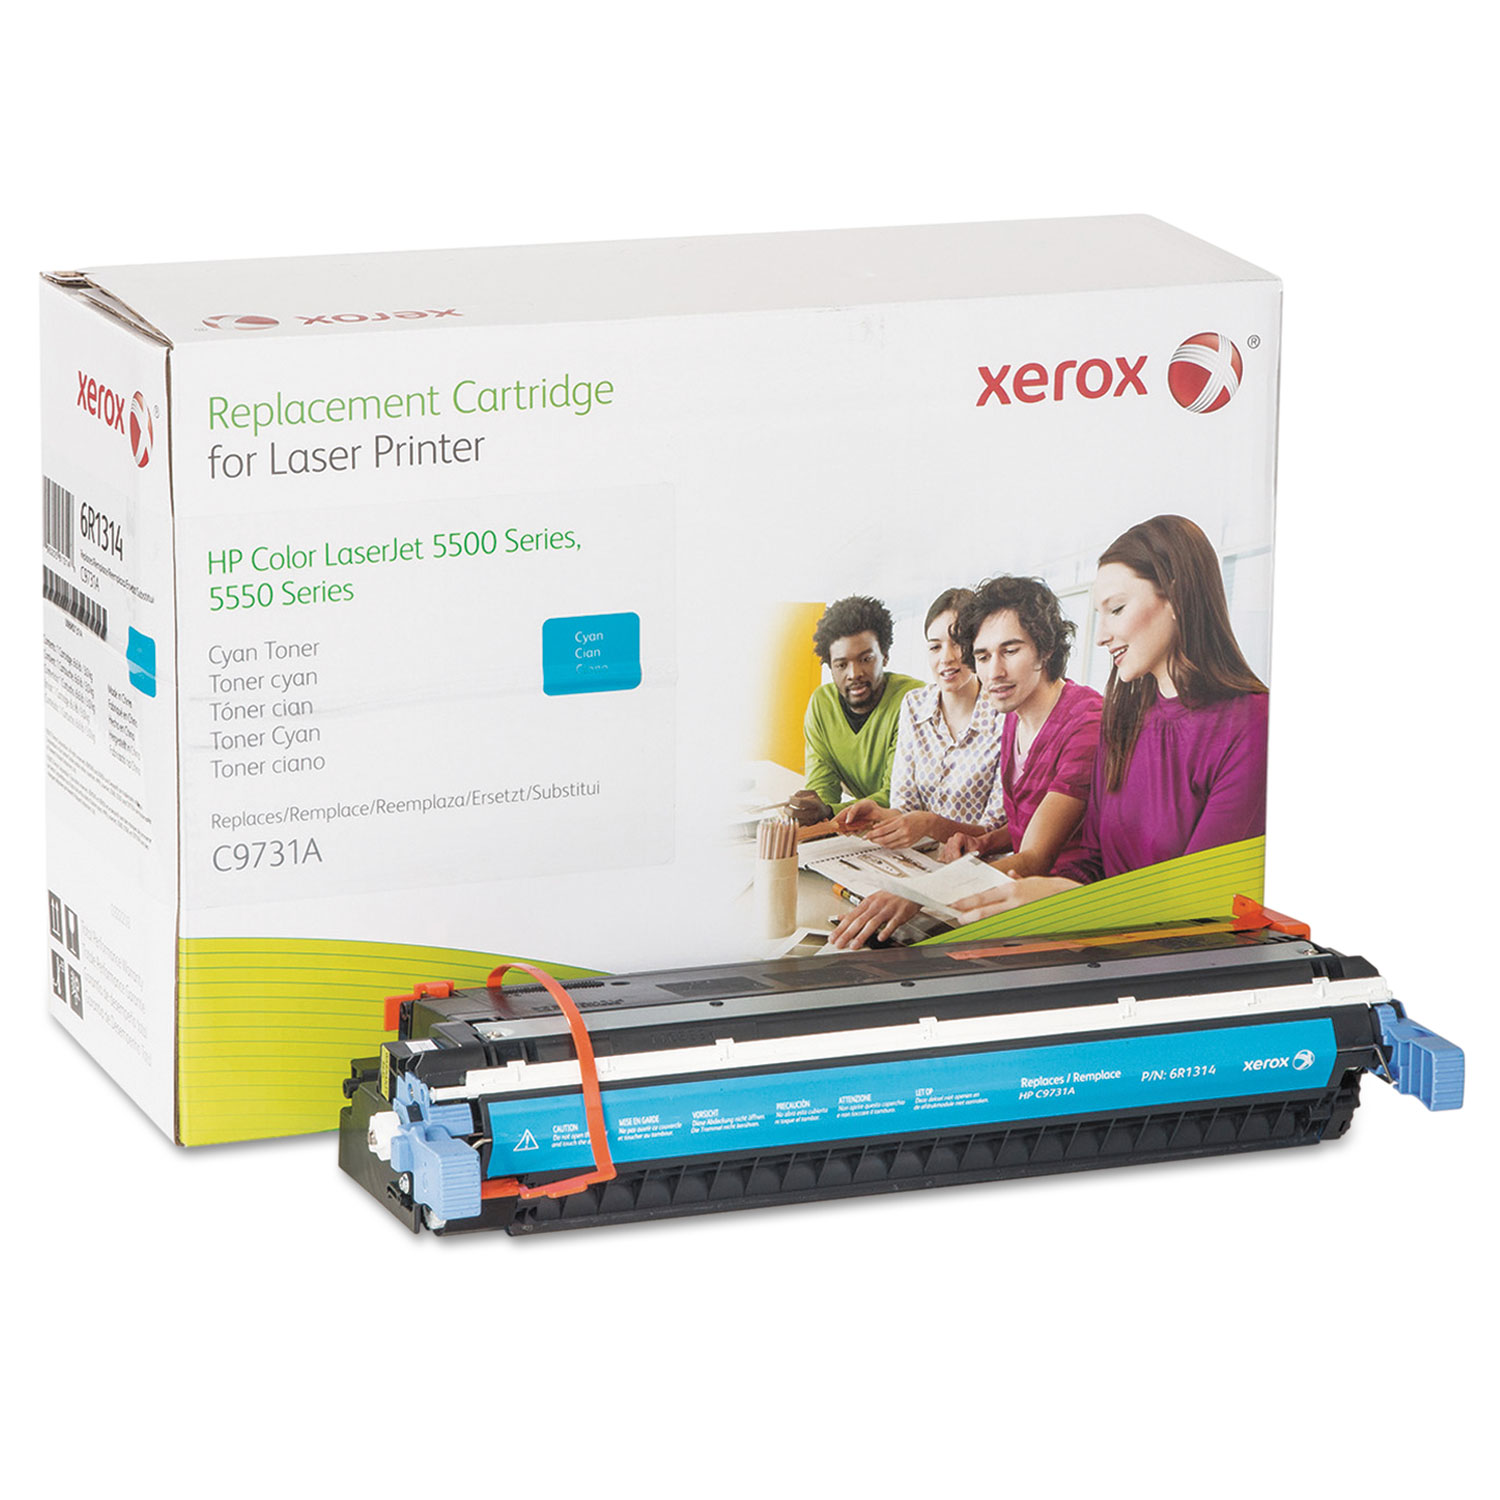  Xerox 006R01314 006R01314 Replacement Toner for C9731A (645A), Cyan (XER006R01314) 